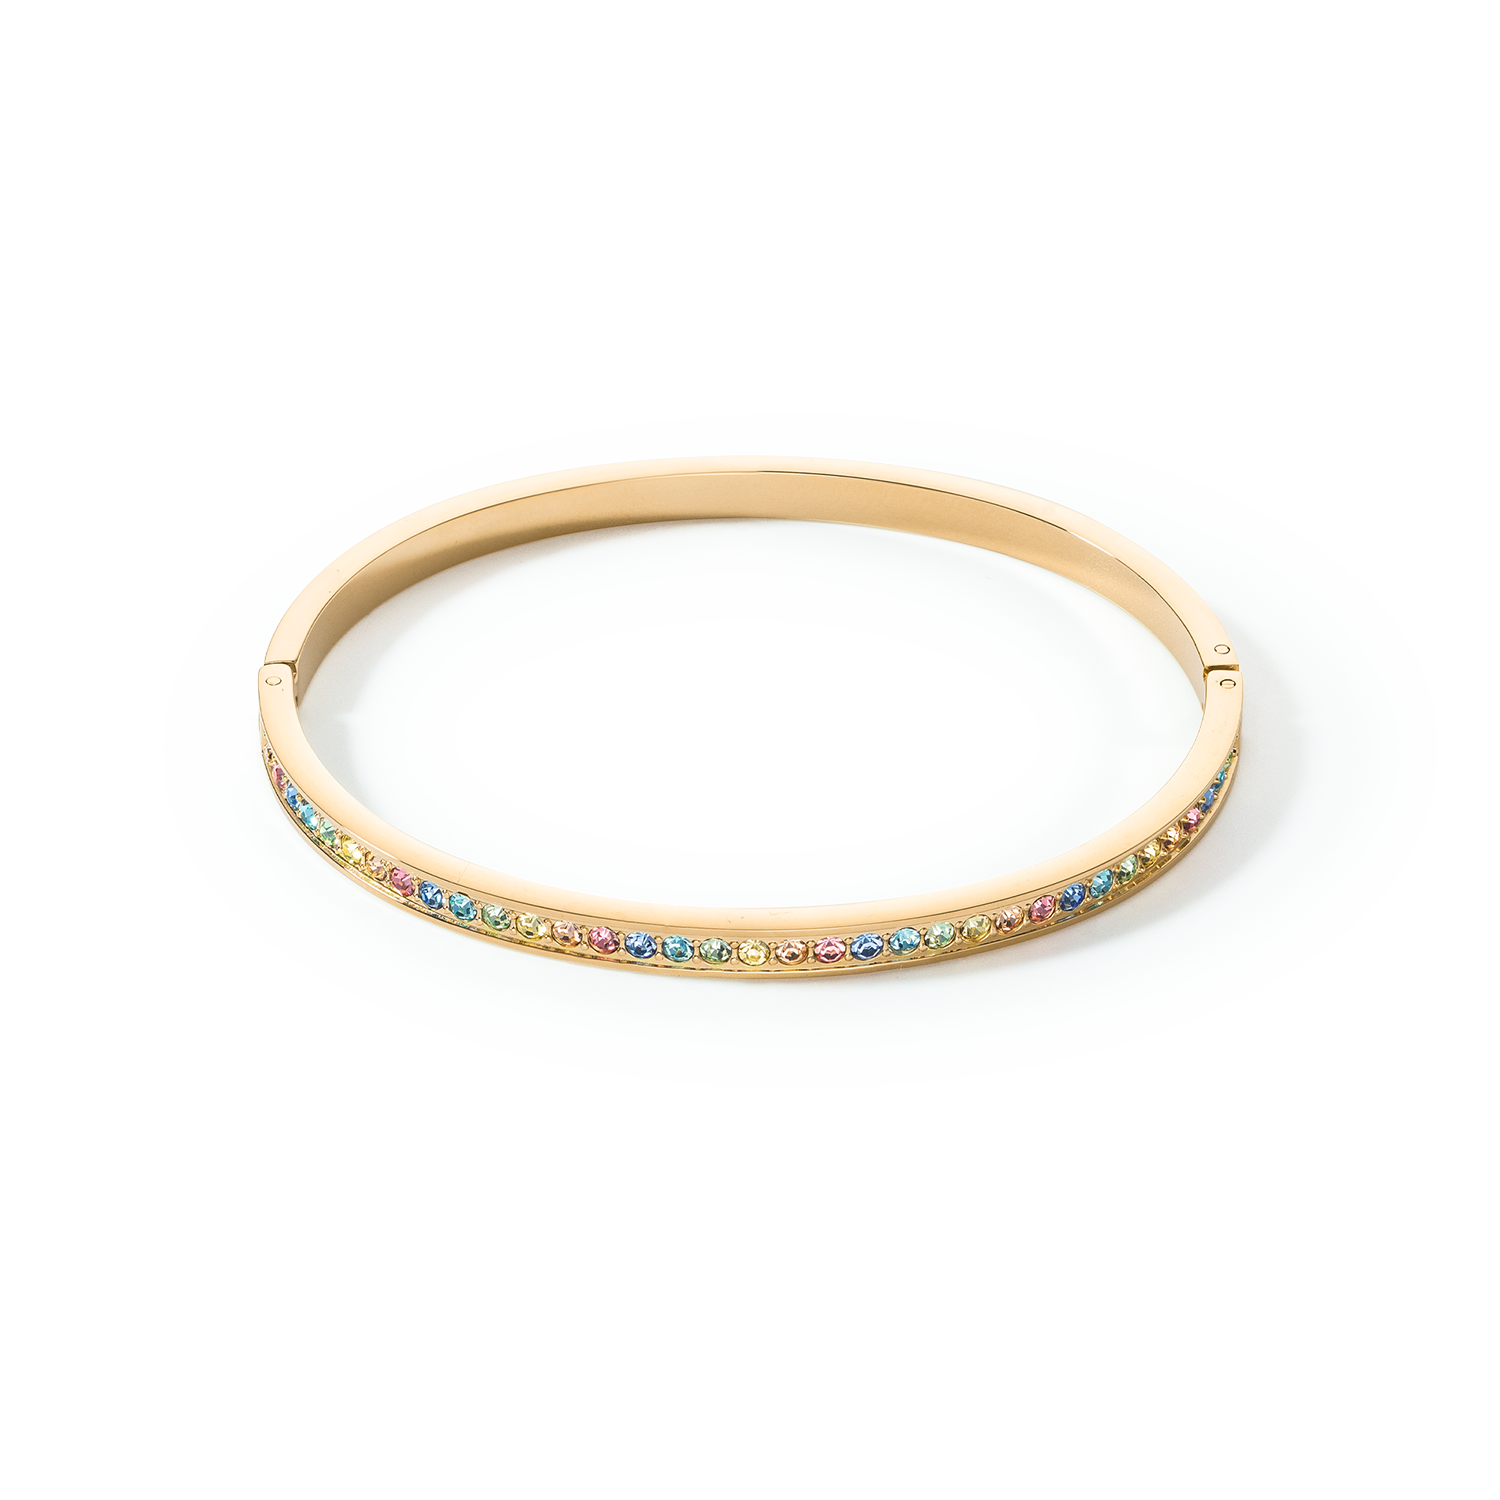 Bangle stainless steel & crystals slim gold multicolour pastel 17